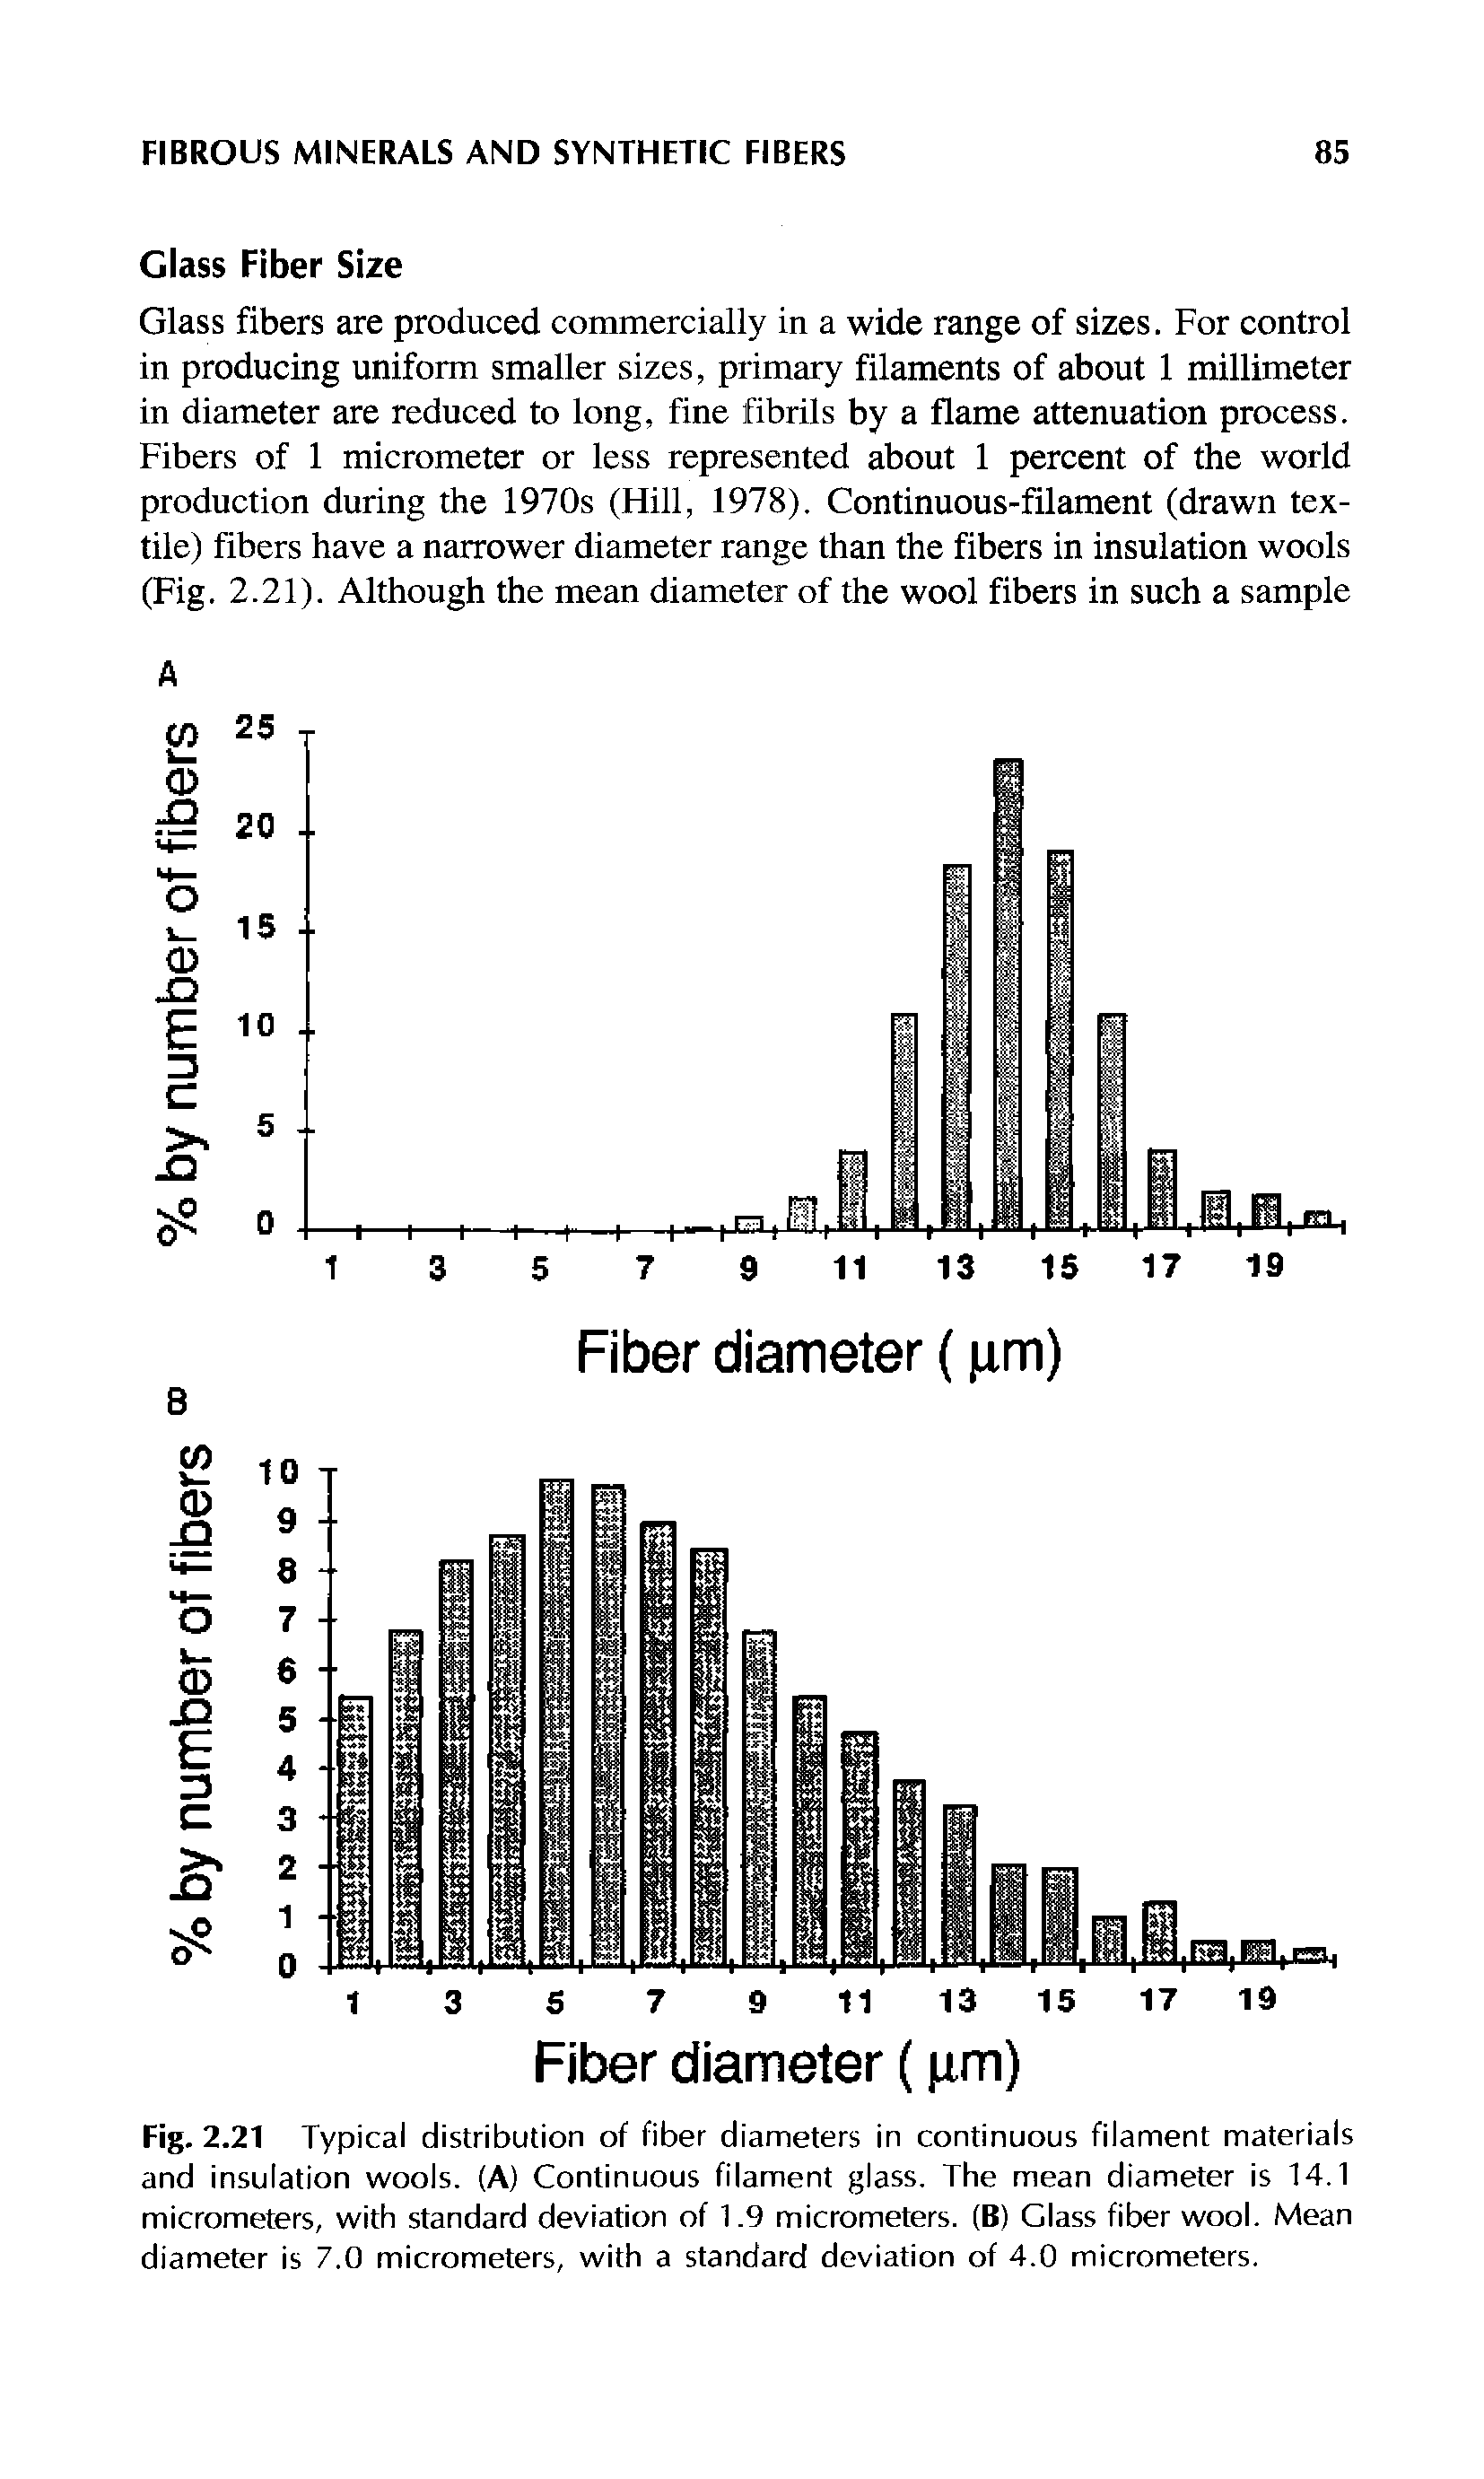 Fig. 2.21 Typical distribution of fiber diameters in continuous filament materials and insulation wools. (A) Continuous filament glass. The mean diameter is 14.1 micrometers, with standard deviation of 1.9 micrometers. (B) Glass fiber wool. Mean diameter is 7.0 micrometers, with a standard deviation of 4.0 micrometers.